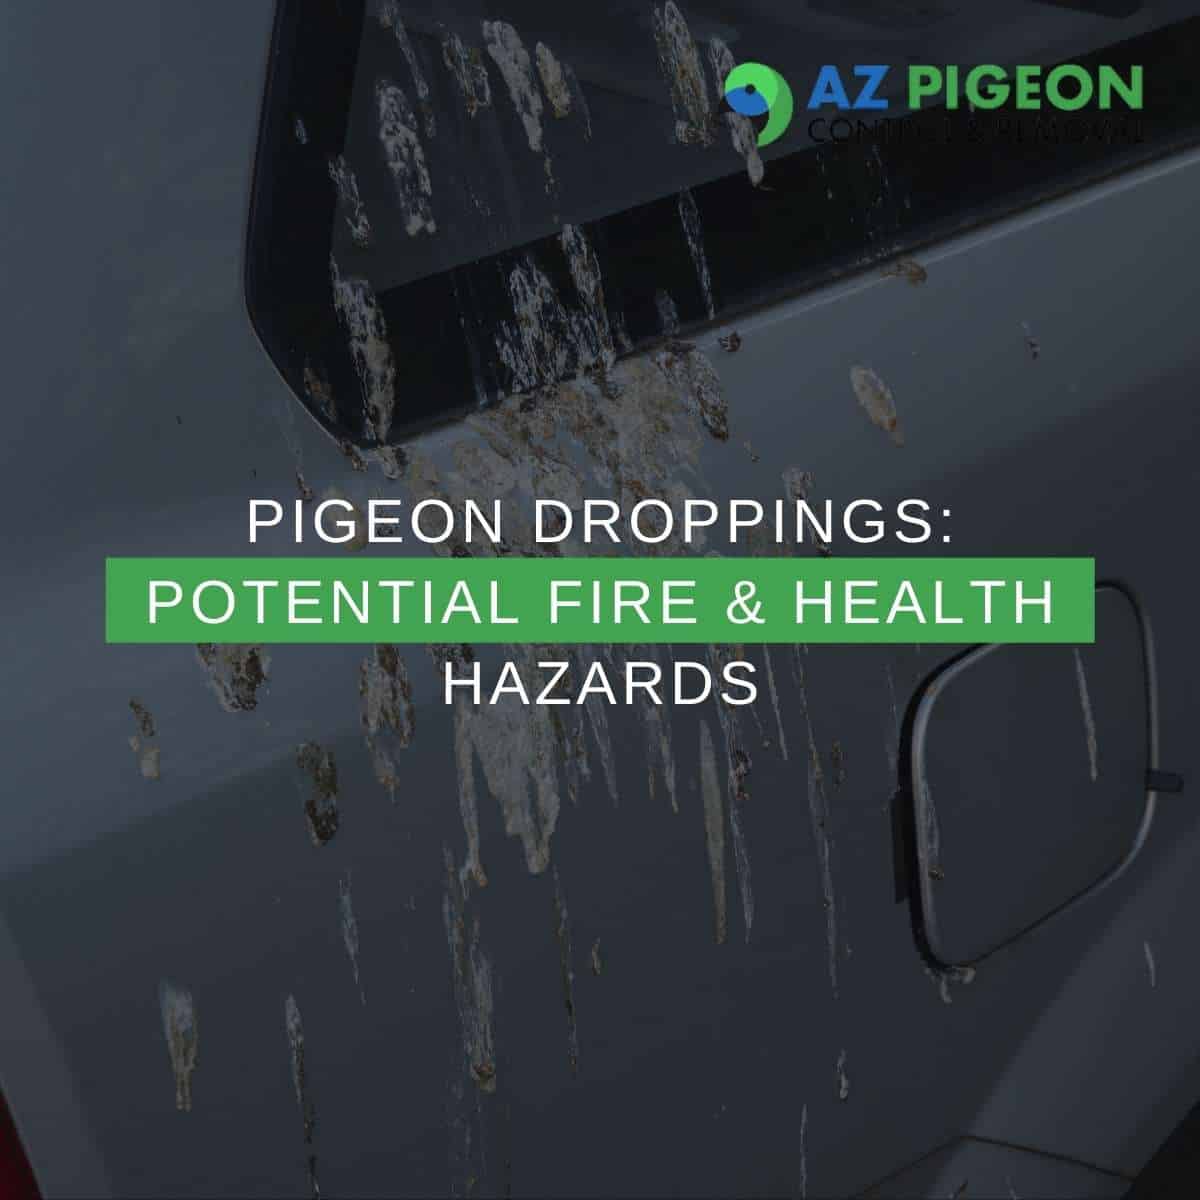 Pigeon Droppings Potential Fire & Health Hazards